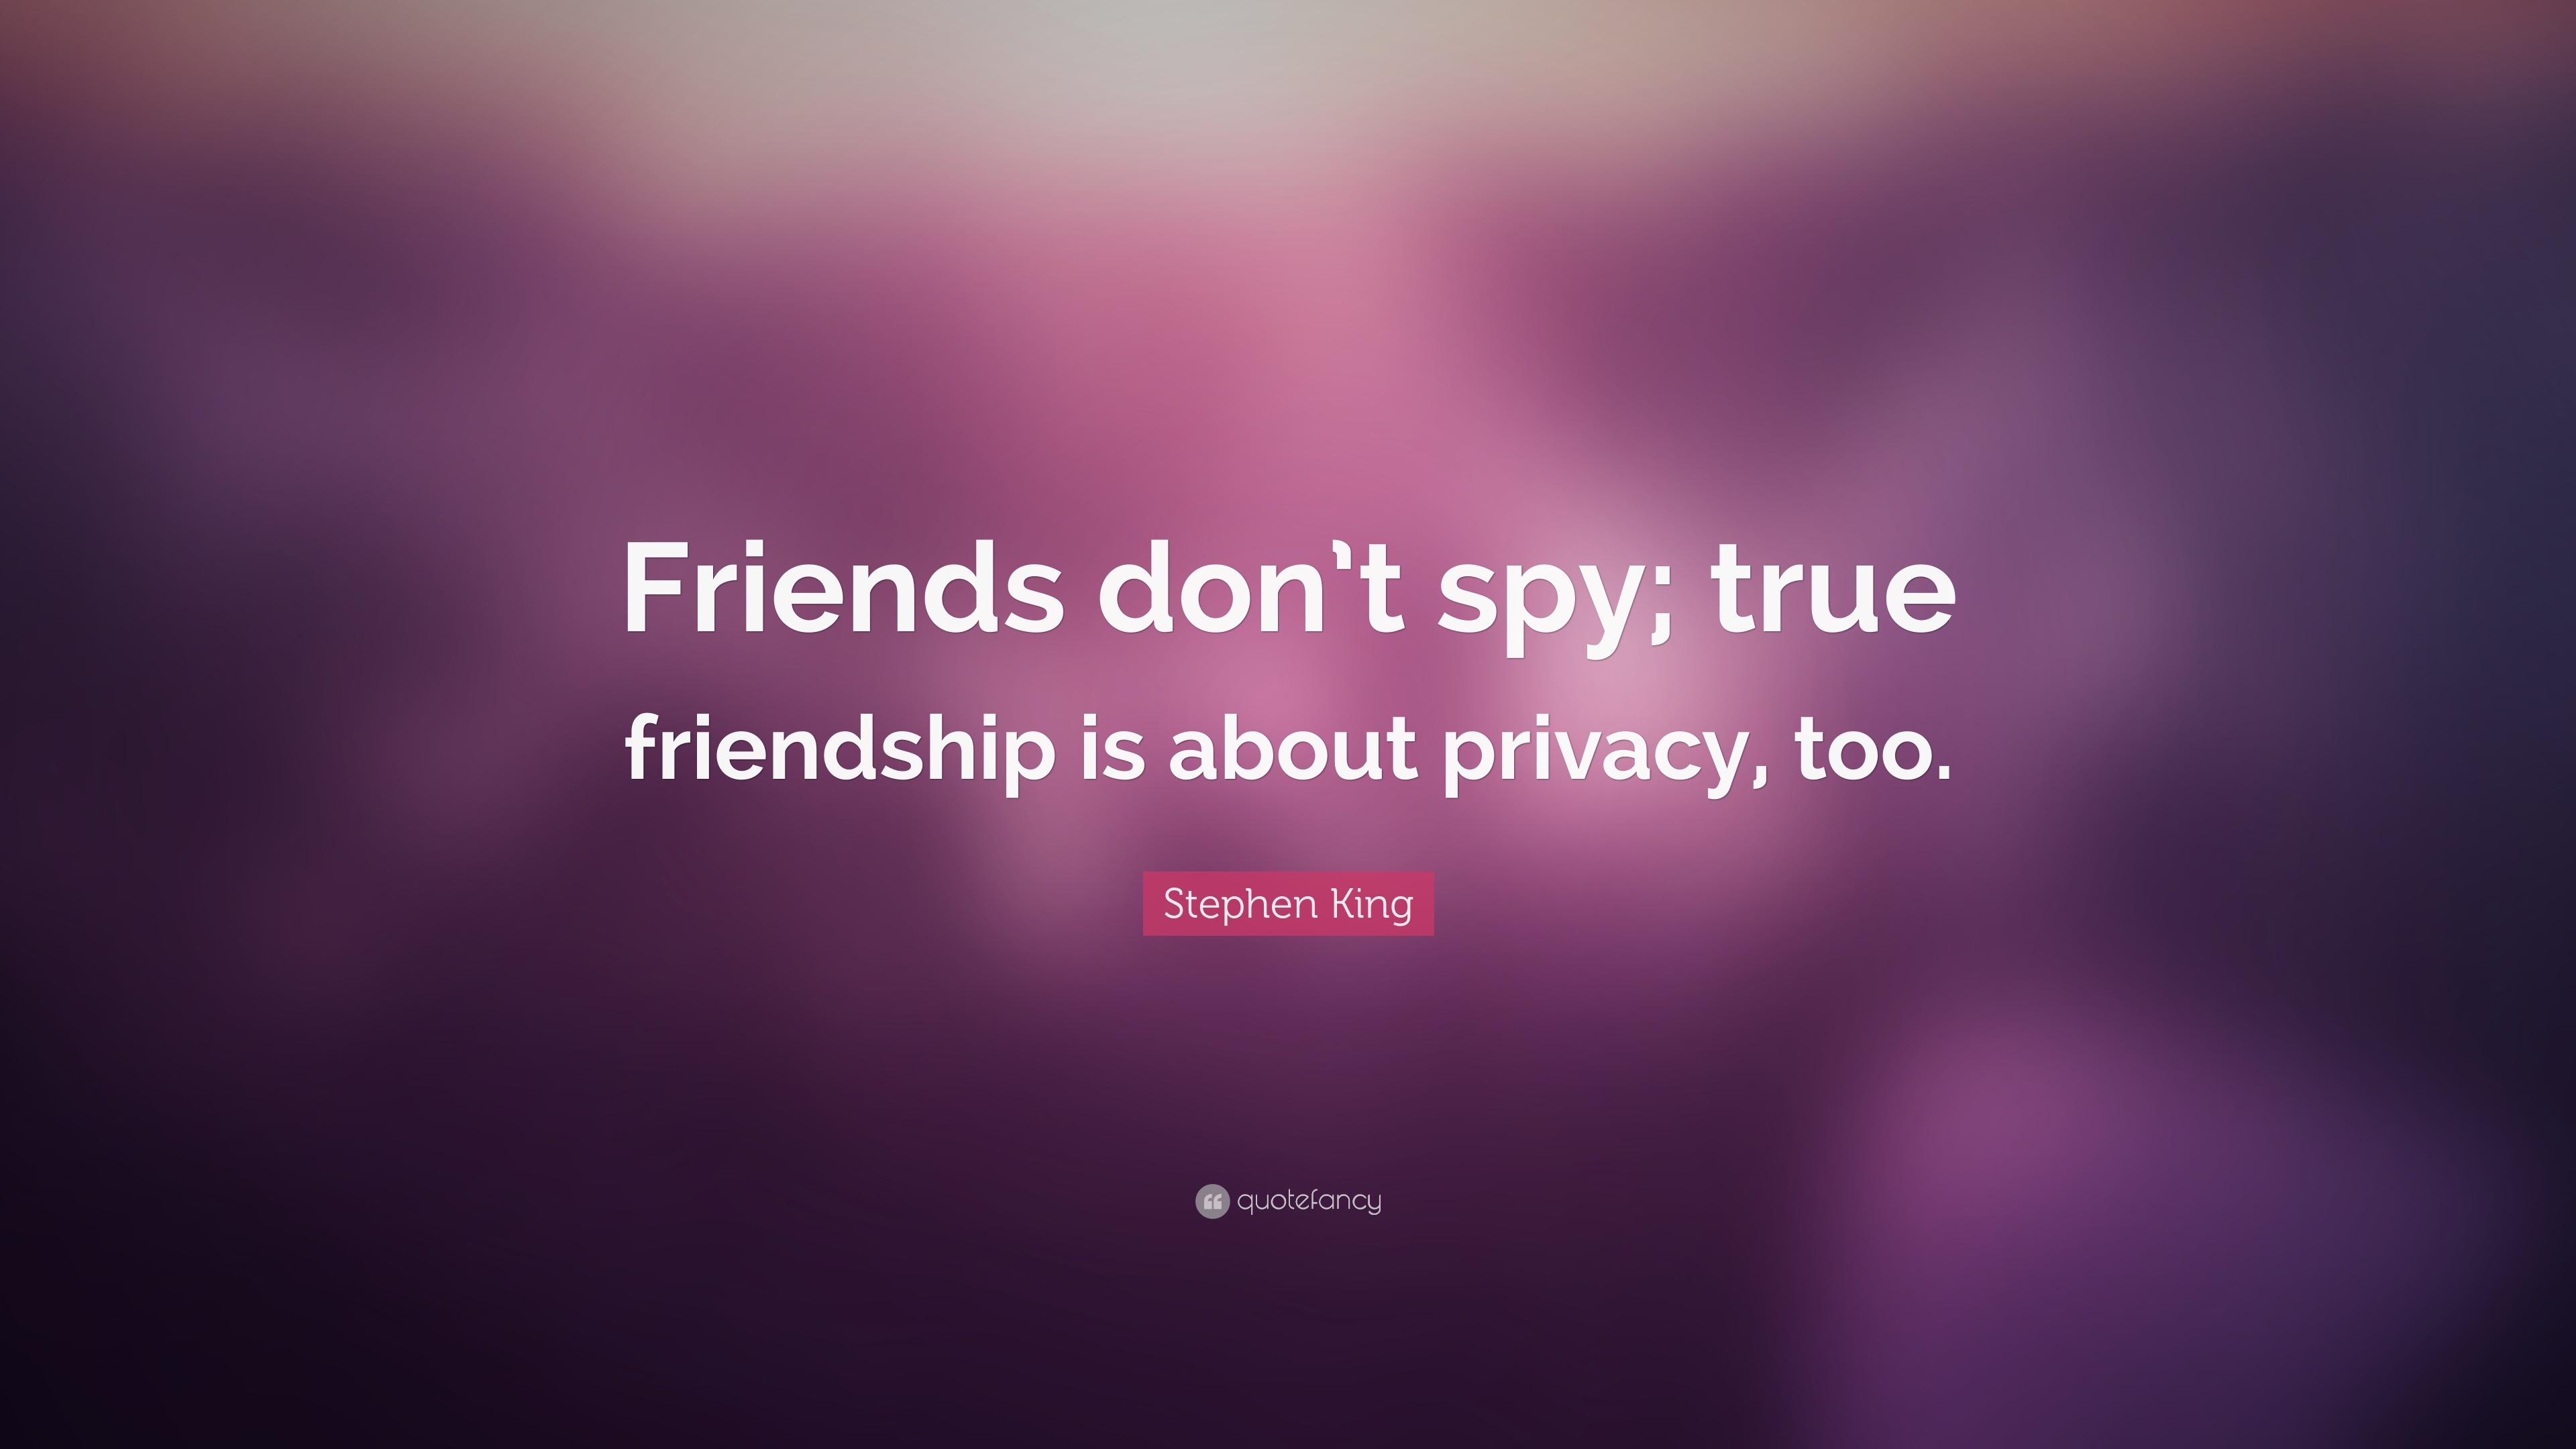 Stephen King Quote: “Friends don't spy; true friendship is about